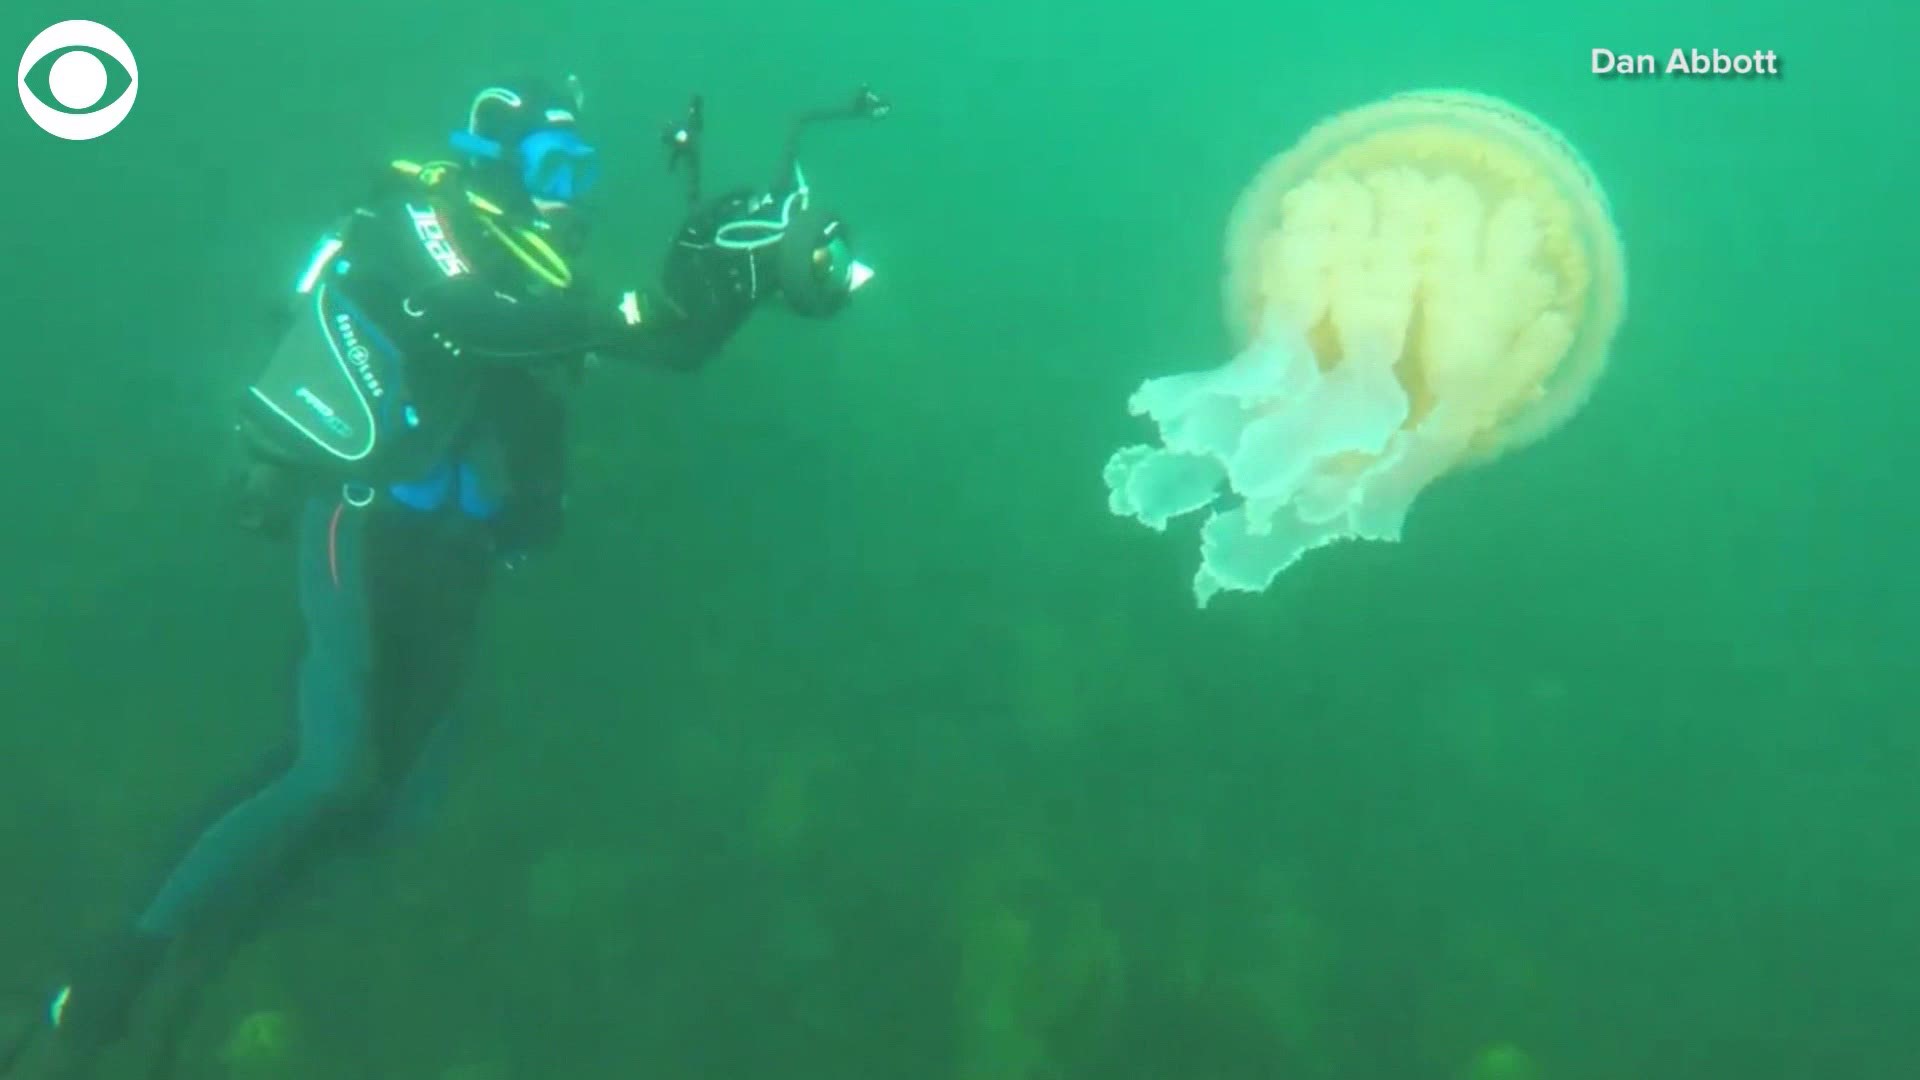 I’m about to namastae out of the water with this huge jellyfish! A biologist and broadcaster, Lizzie Daly, and her cameraman, Dan Abbott, spotted a giant barrel jellyfish over the weekend off the coast of England. Barrel jellyfish start out small about a millimeter in length and can grow up to 3 feet in length.